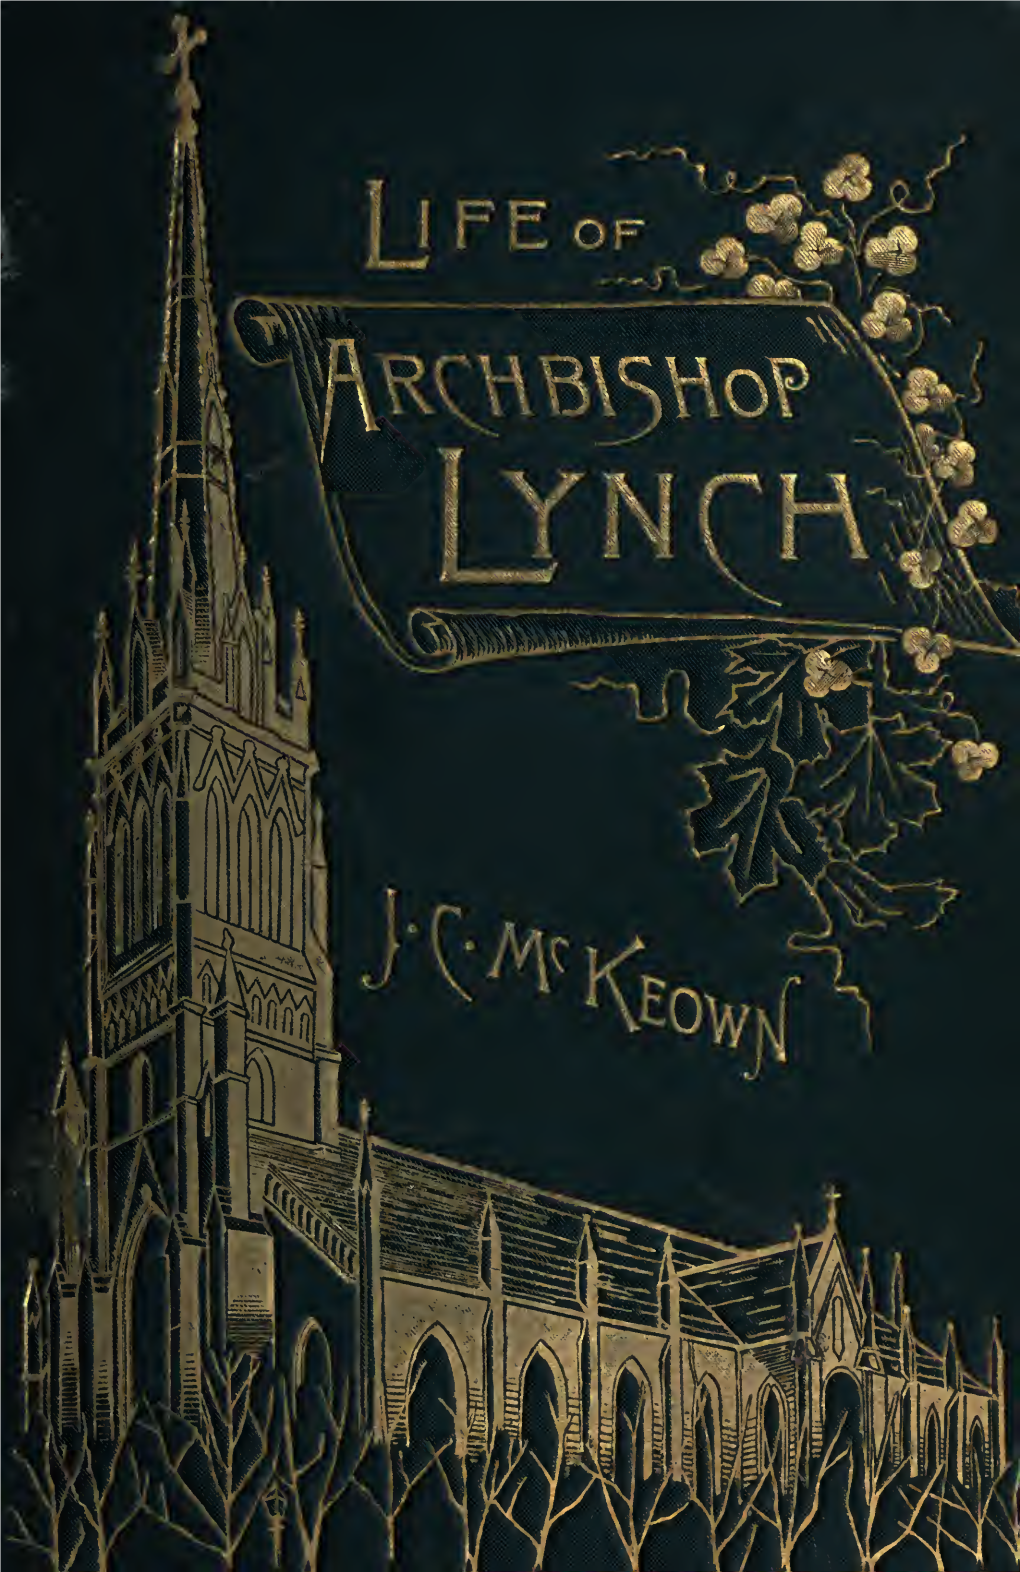 The Life and Labors of Most Rev. John Joseph Lynch, D.D., Cong. Miss., First Archbishop of Toronto